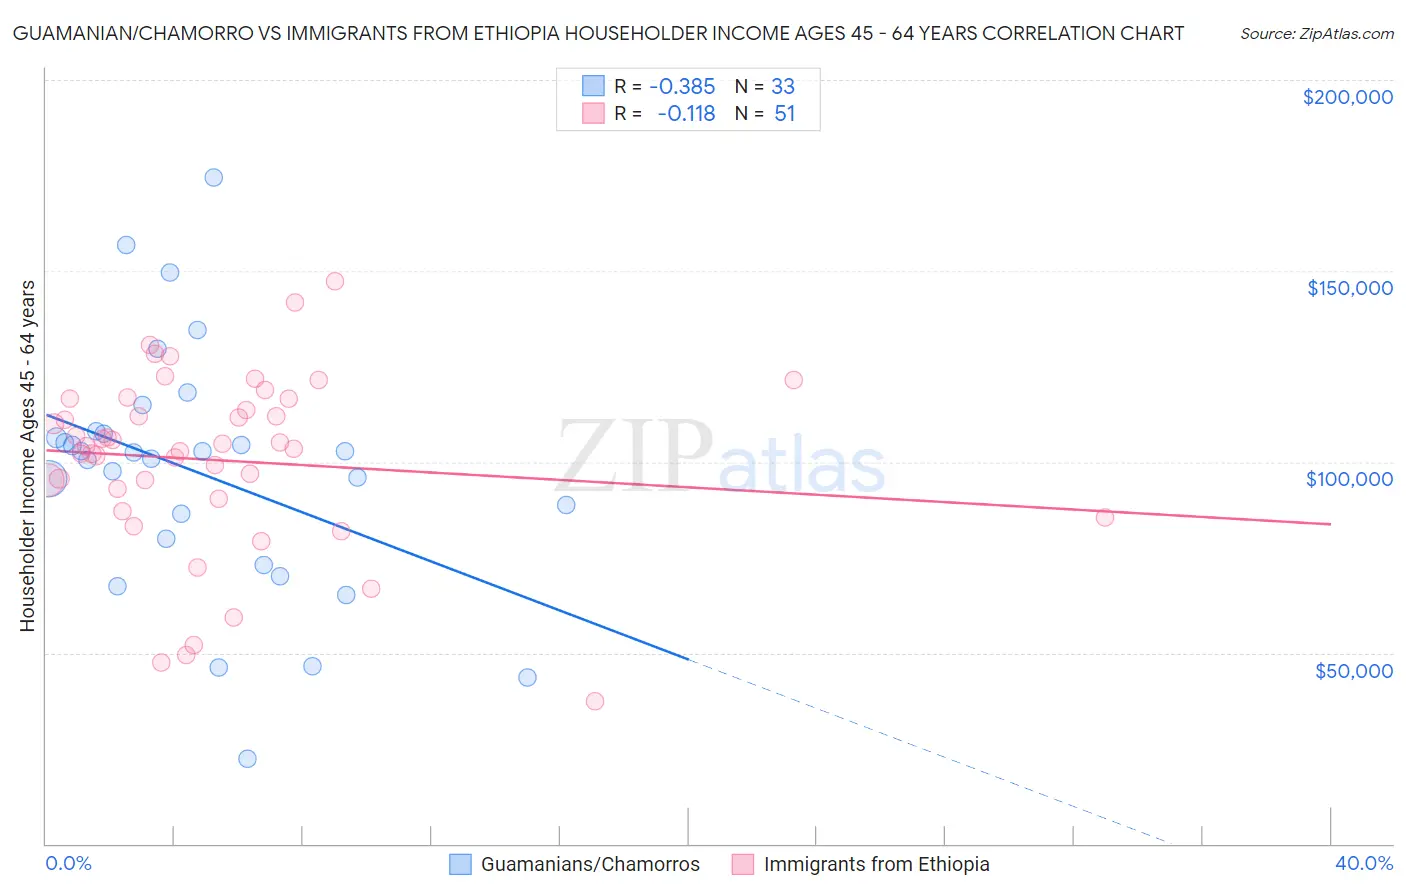 Guamanian/Chamorro vs Immigrants from Ethiopia Householder Income Ages 45 - 64 years